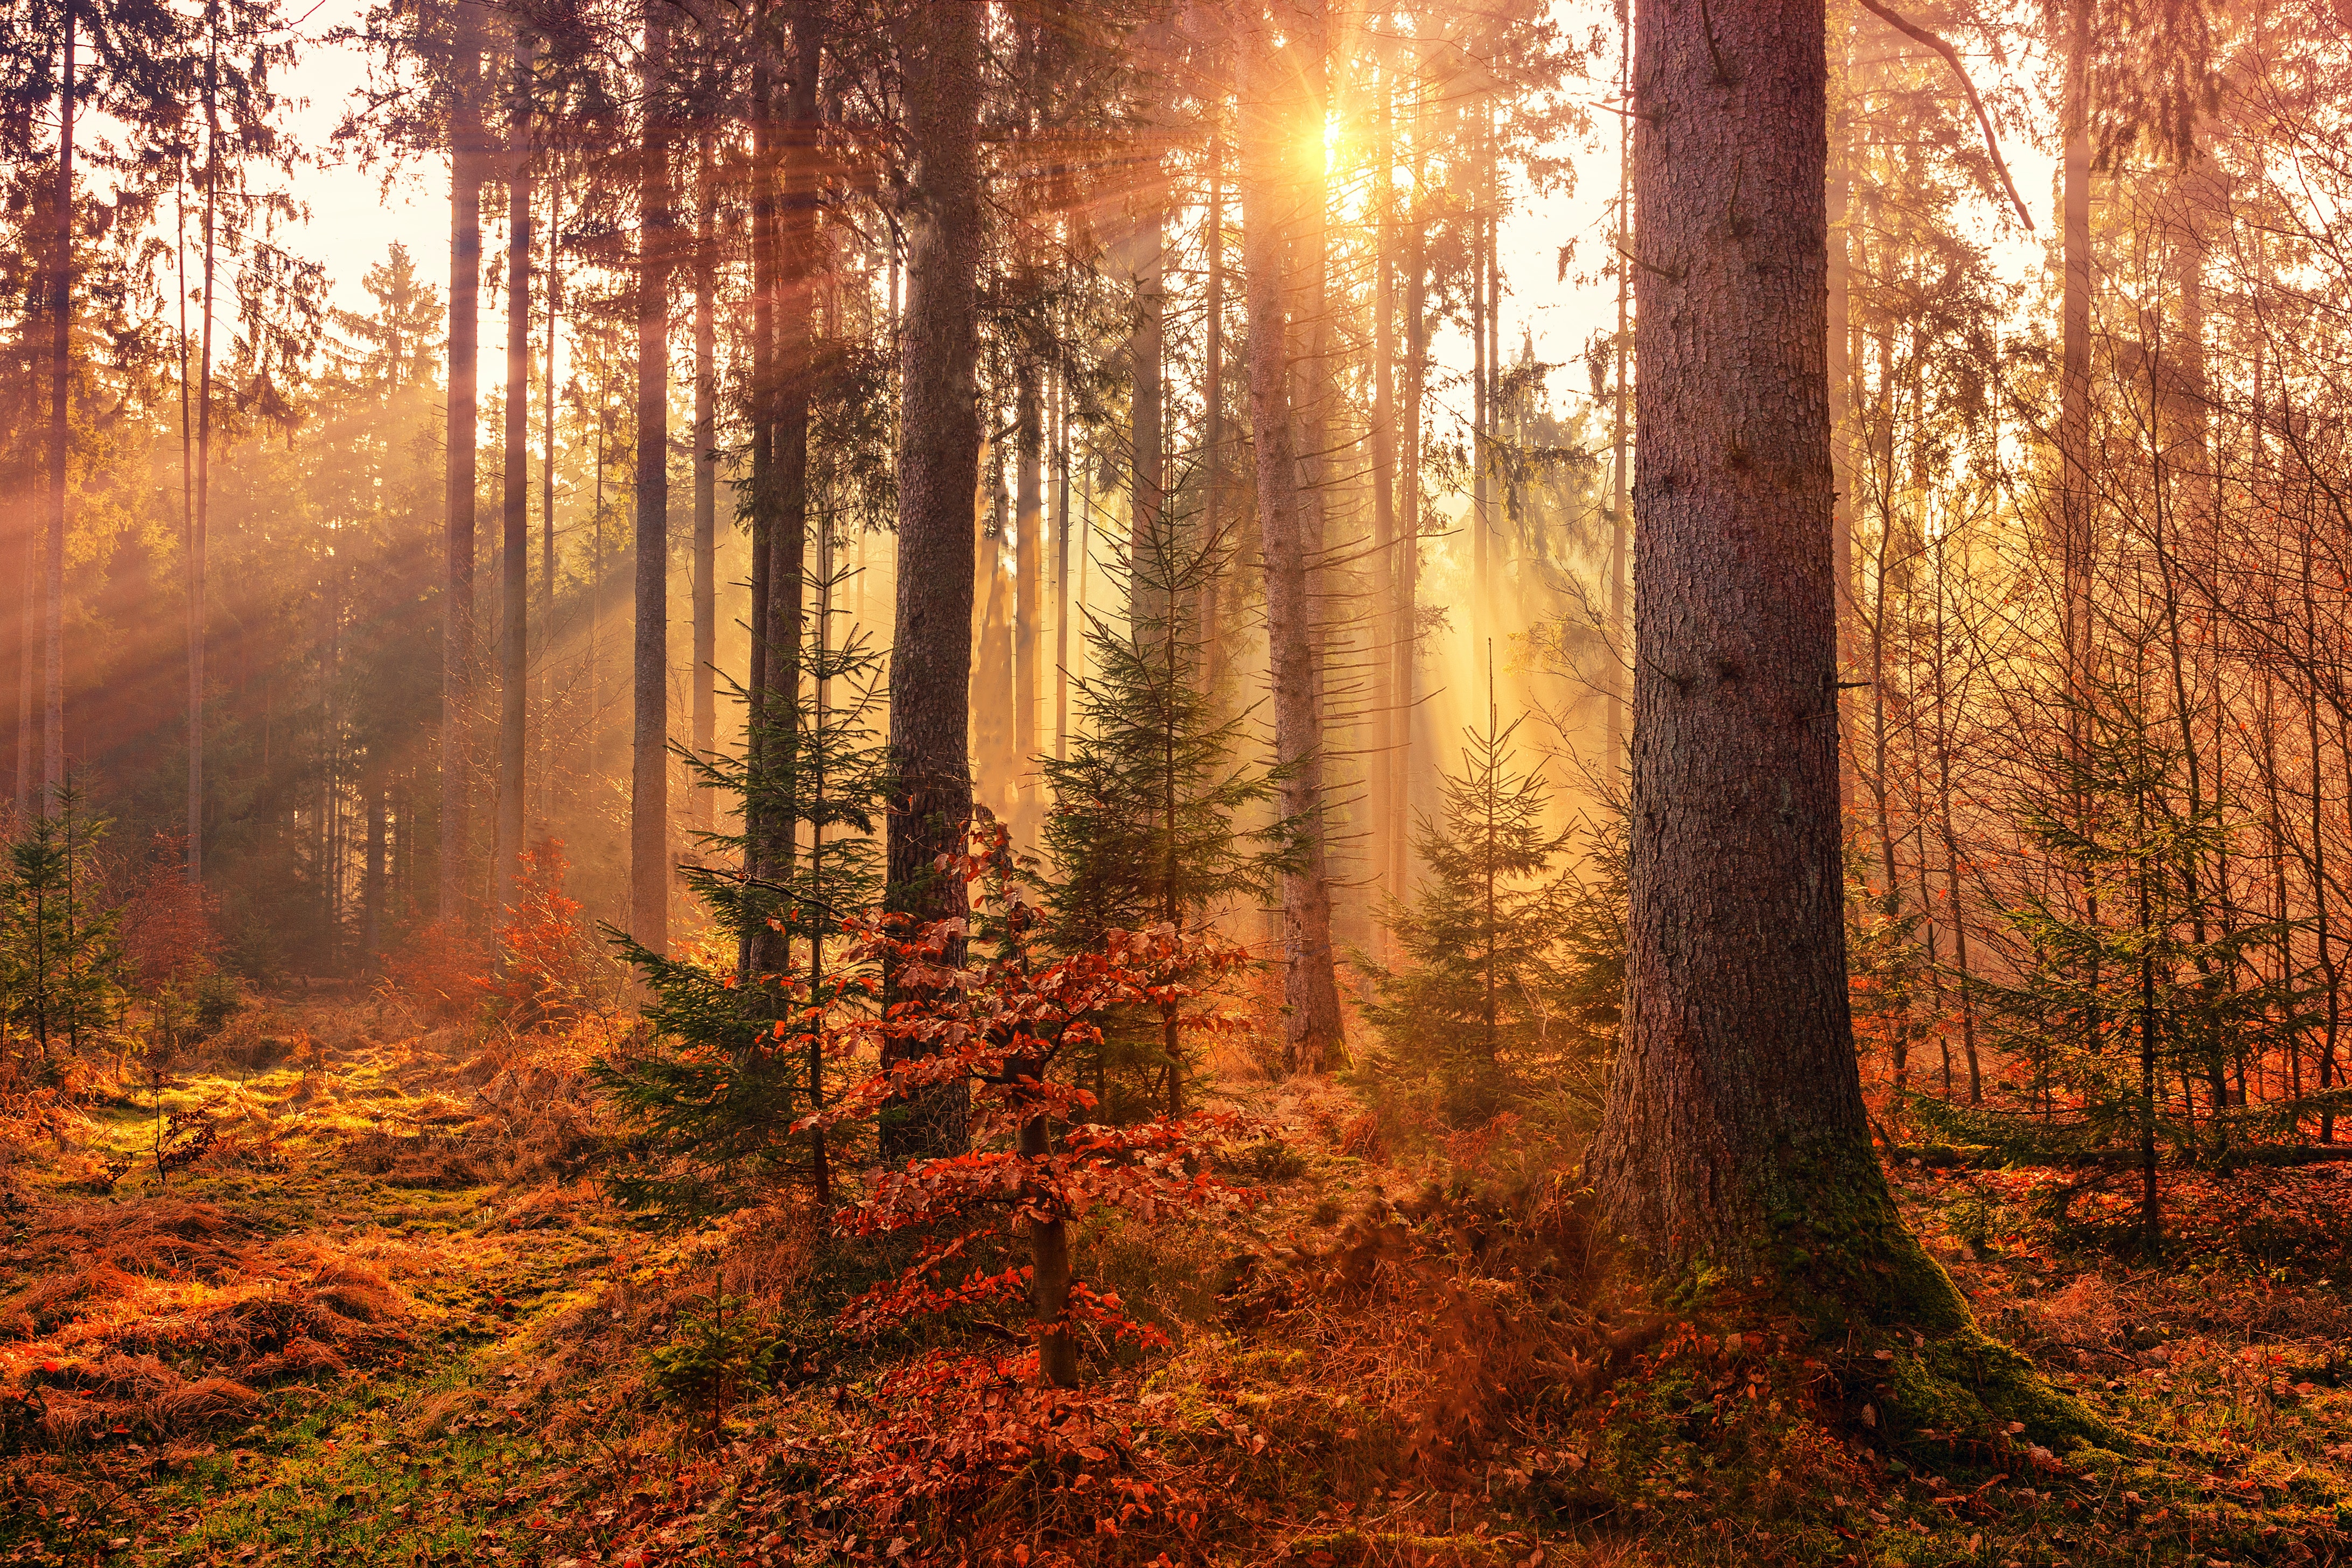 Rays of sunlight shining through the autumn colours of a forest.